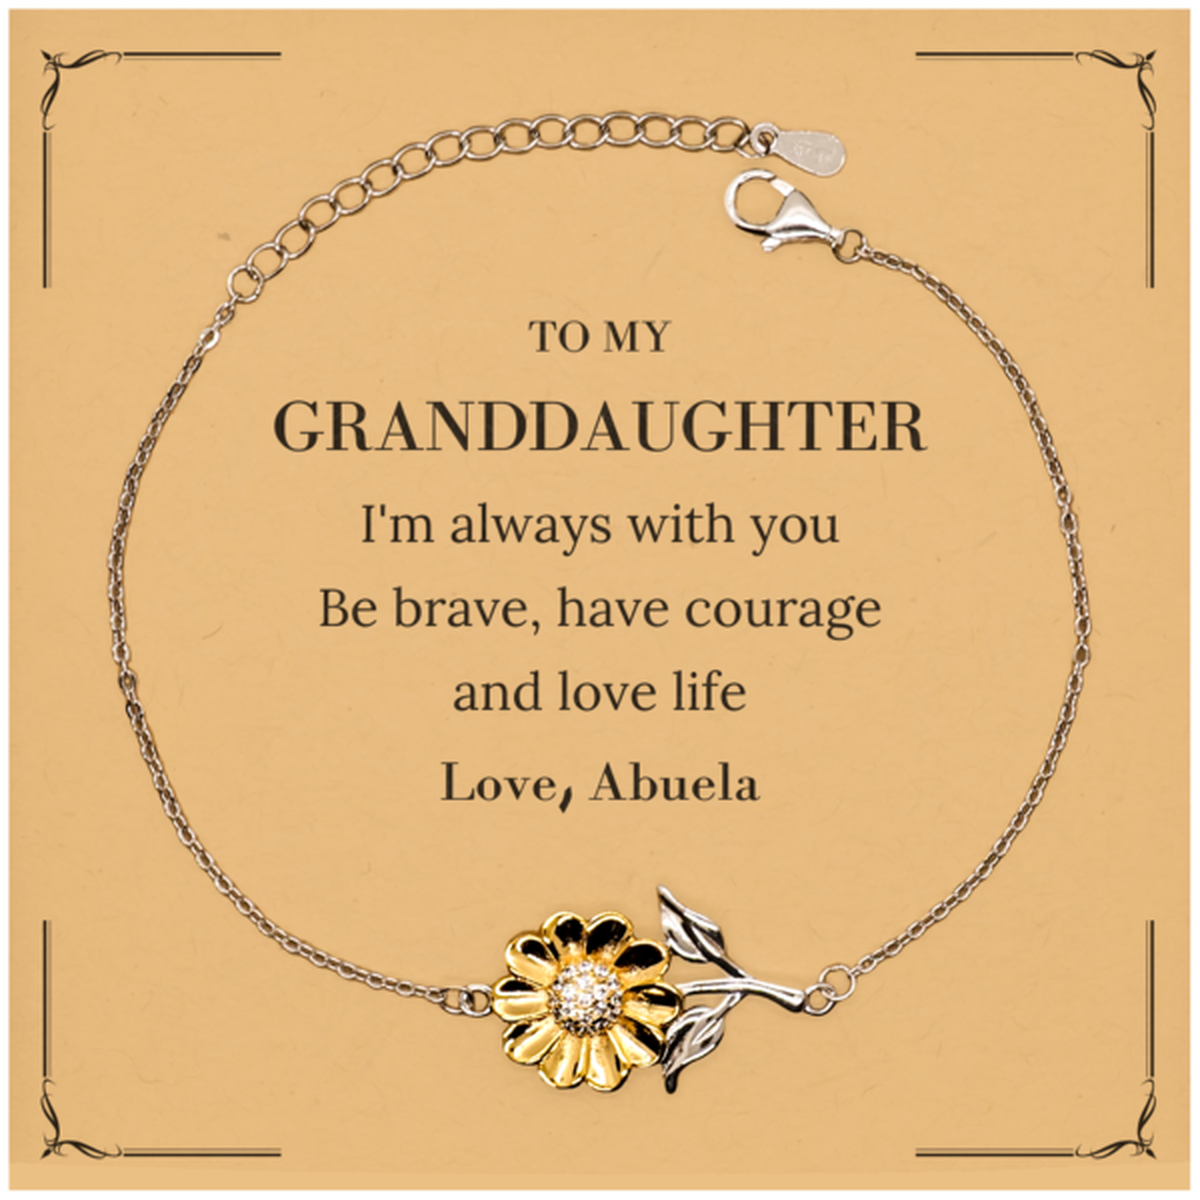 To My Granddaughter Gifts from Abuela, Unique Sunflower Bracelet Inspirational Christmas Birthday Graduation Gifts for Granddaughter I'm always with you. Be brave, have courage and love life. Love, Abuela